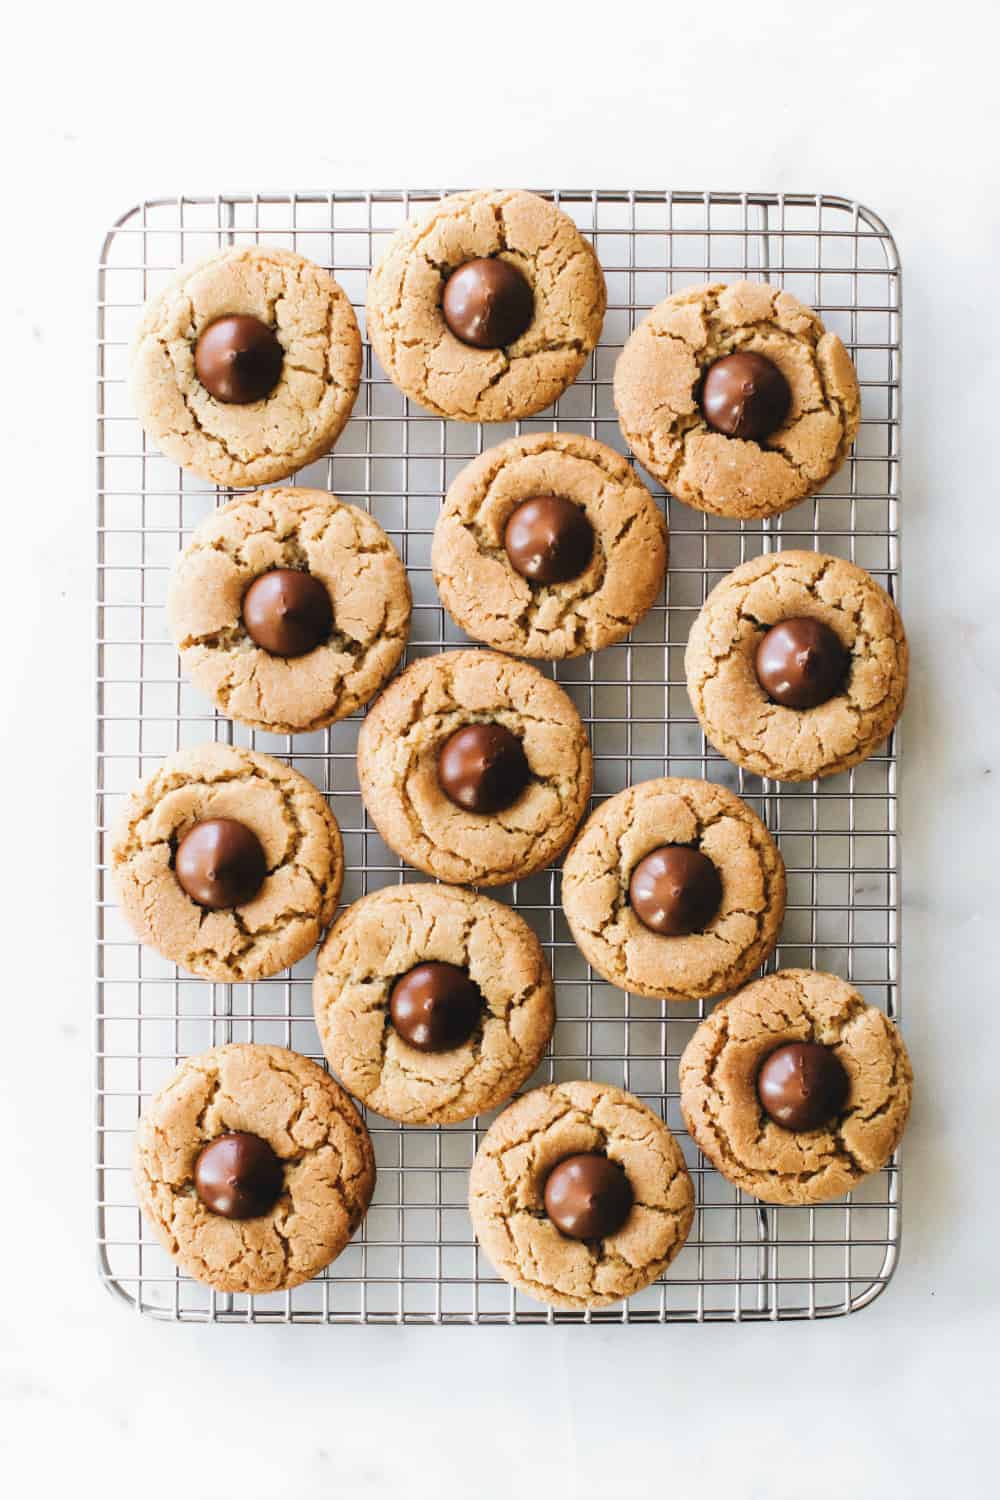 Peanut Butter Blossoms - sometimes known as Hershey Kiss Cookies or Peanut Butter Kiss Cookies - are the perfect classic holiday cookie to make with kids or bring to a cookie exchange.